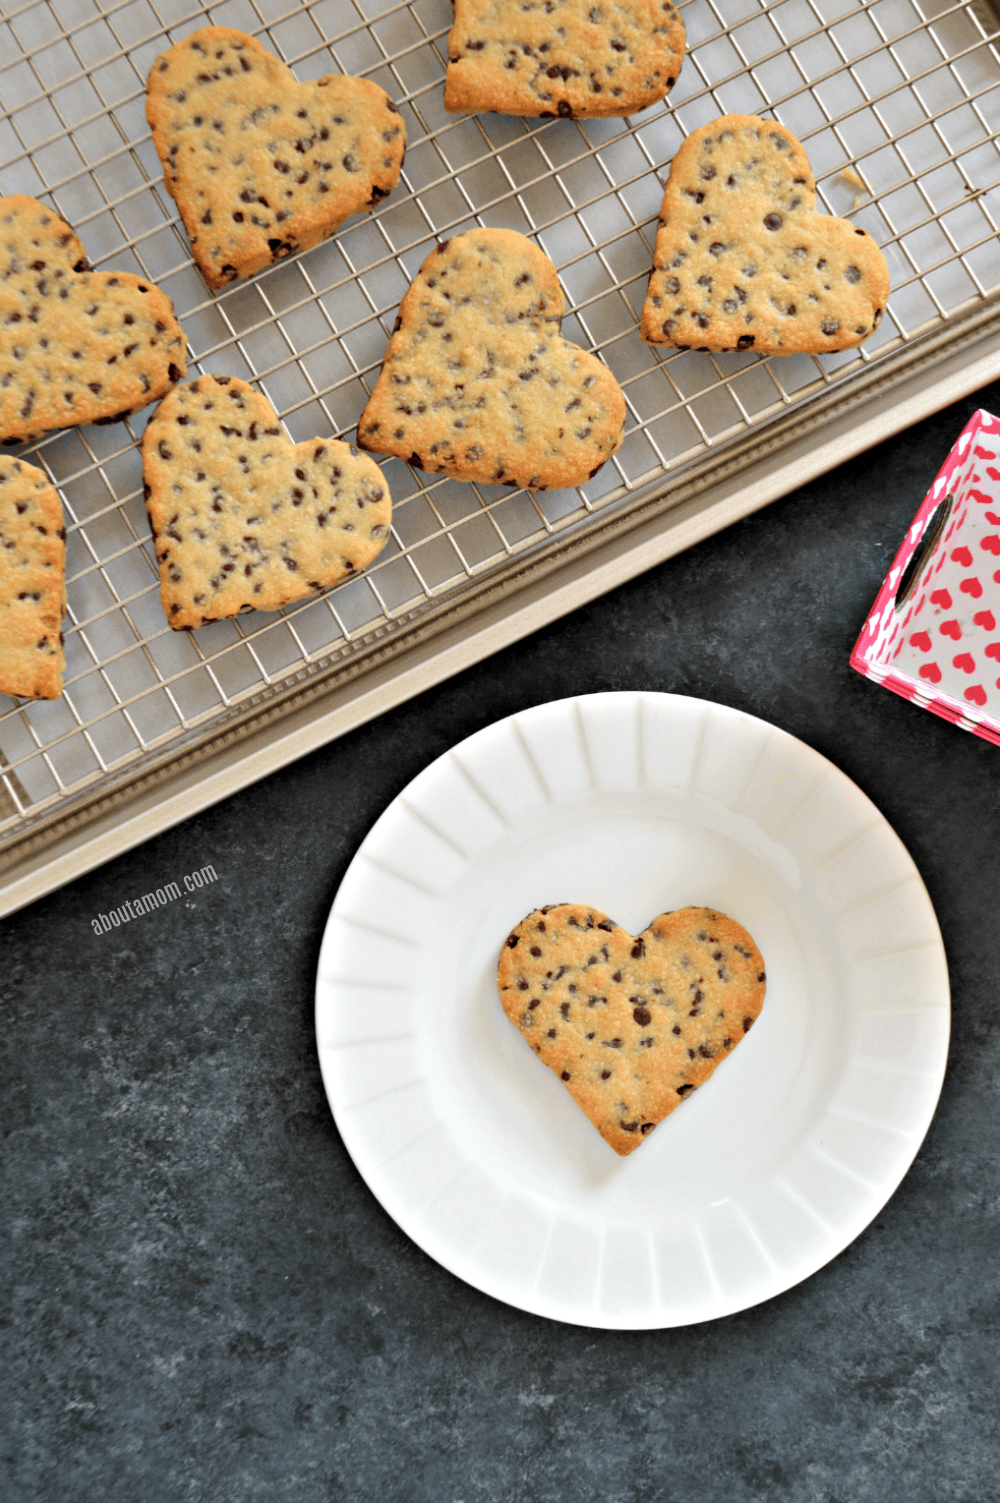 Nothing says I love you like a warm from the oven chocolate chip cookie. Except, of course, when it comes in the shape of a heart. These heart shaped chocolate chip cookies are the perfect way to say "I love you" this Valentine's Day or any day of the year.